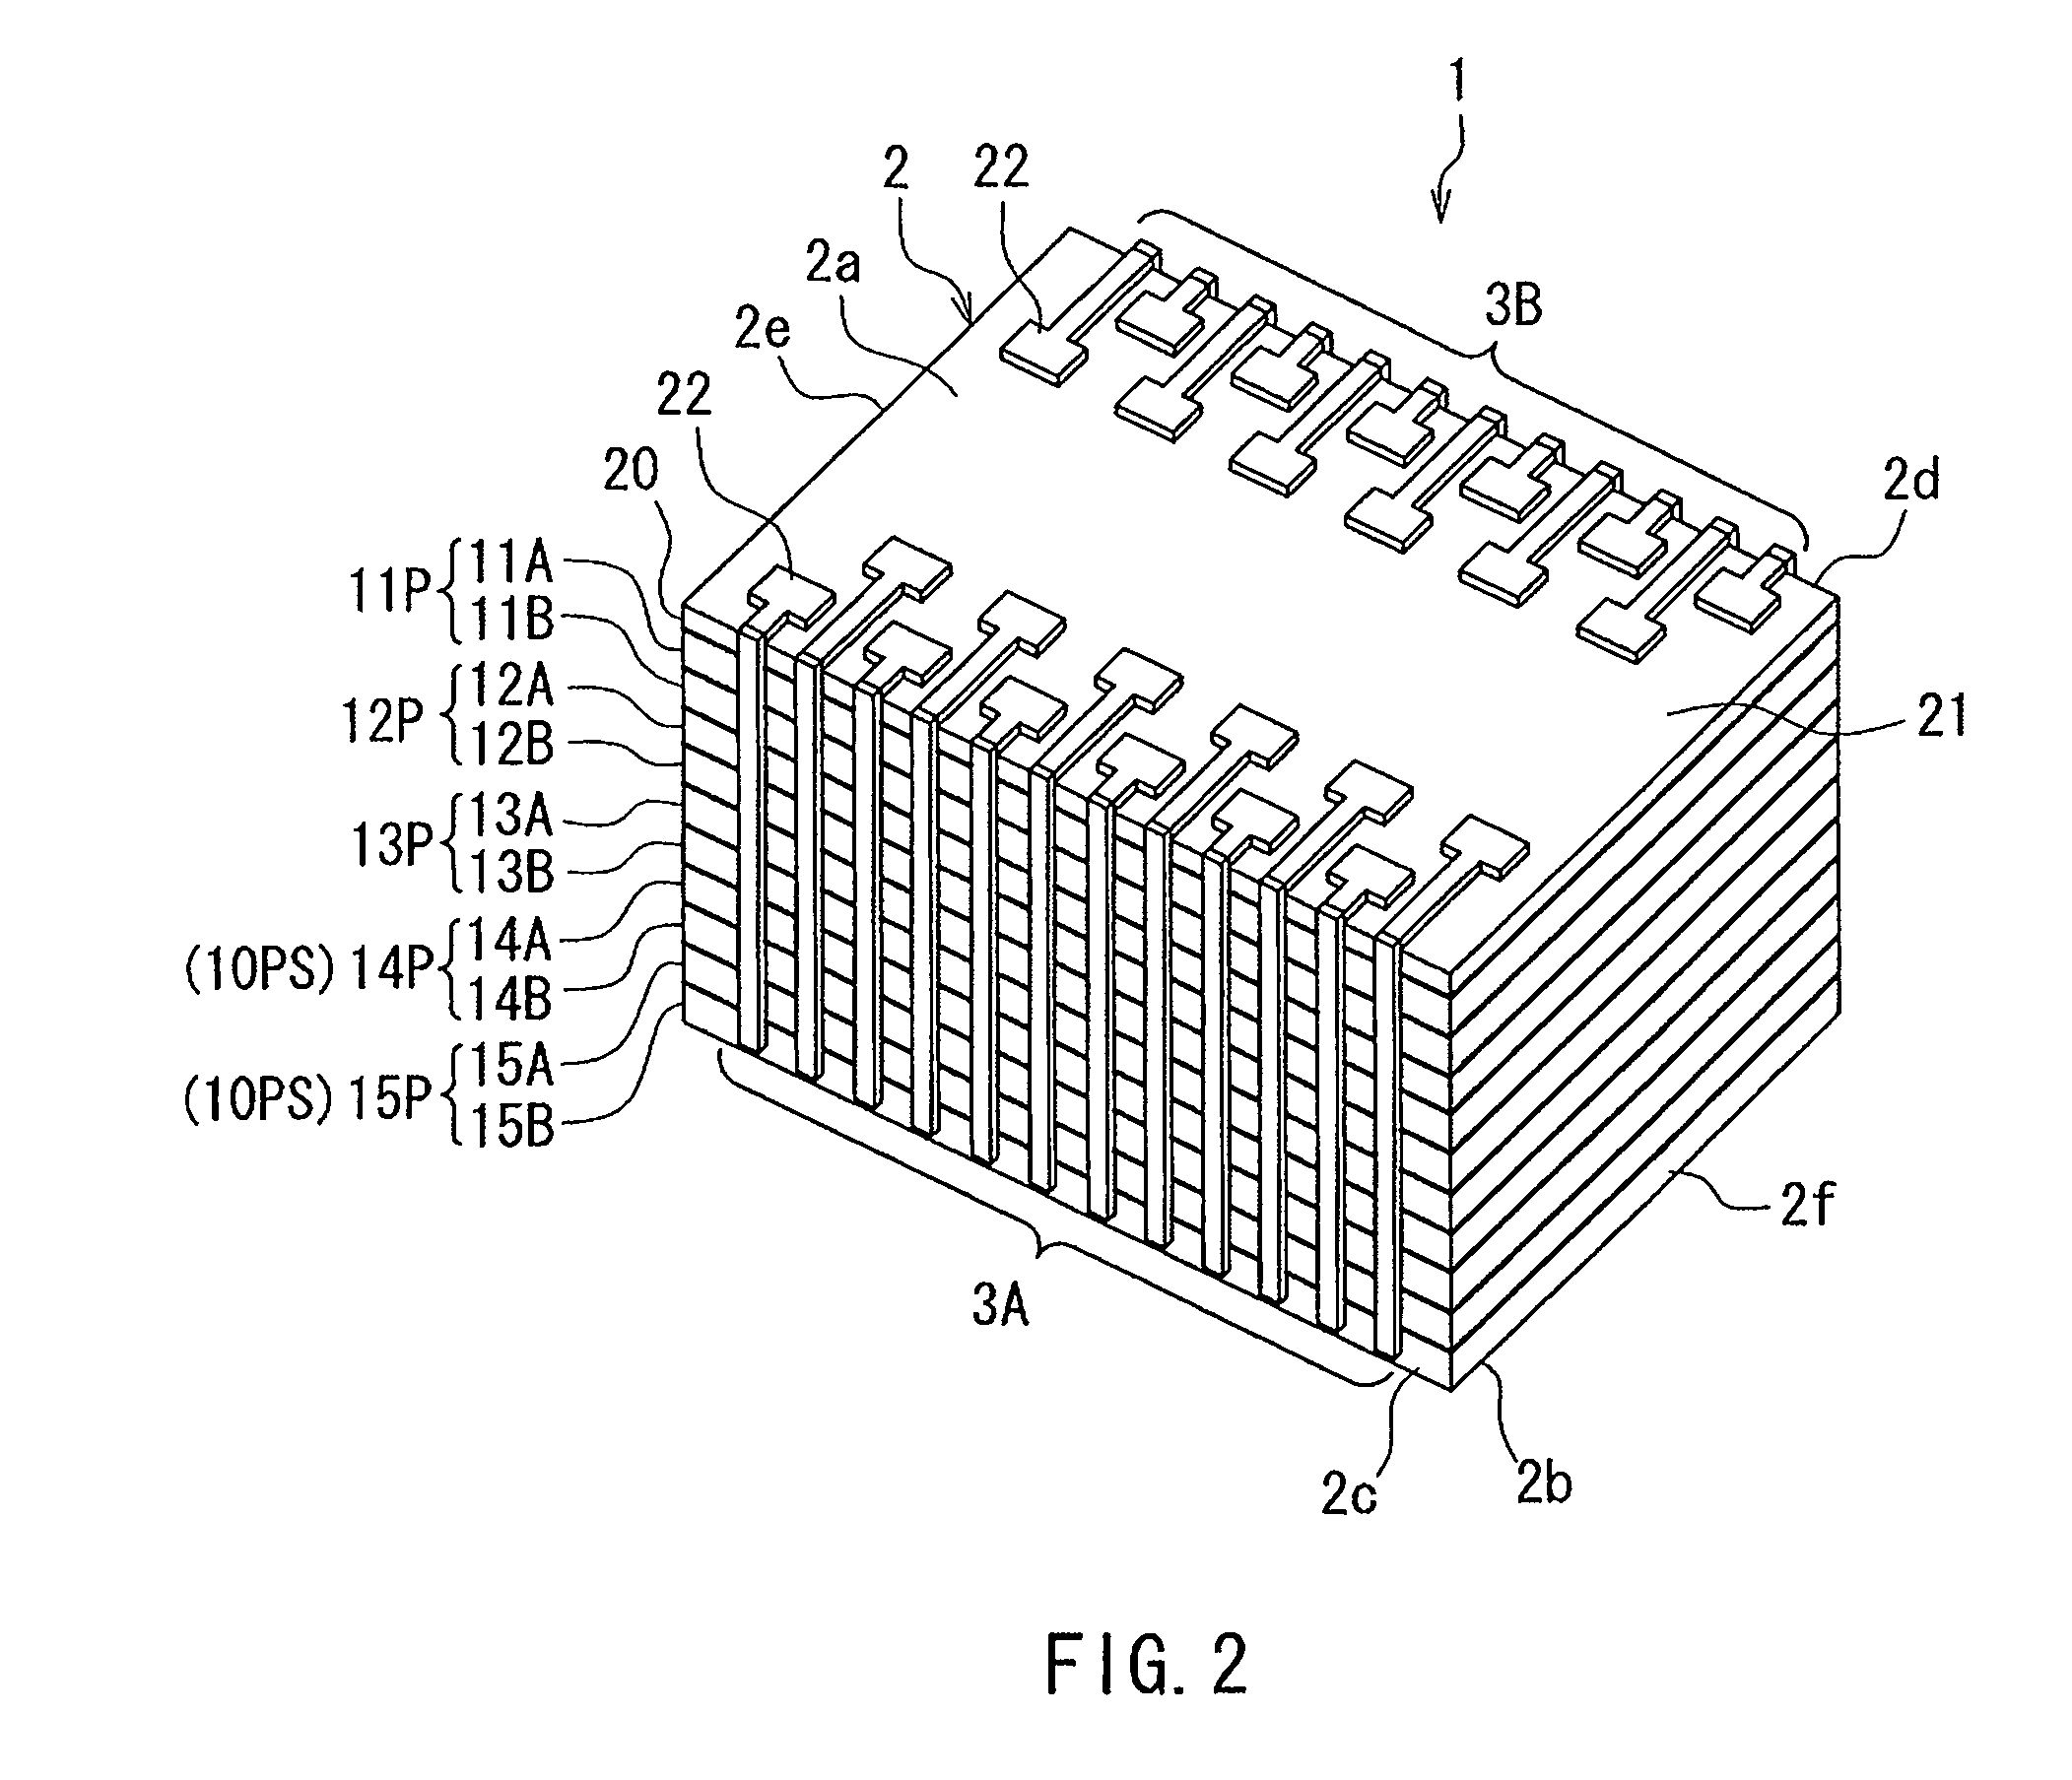 Layered chip package with wiring on the side surfaces